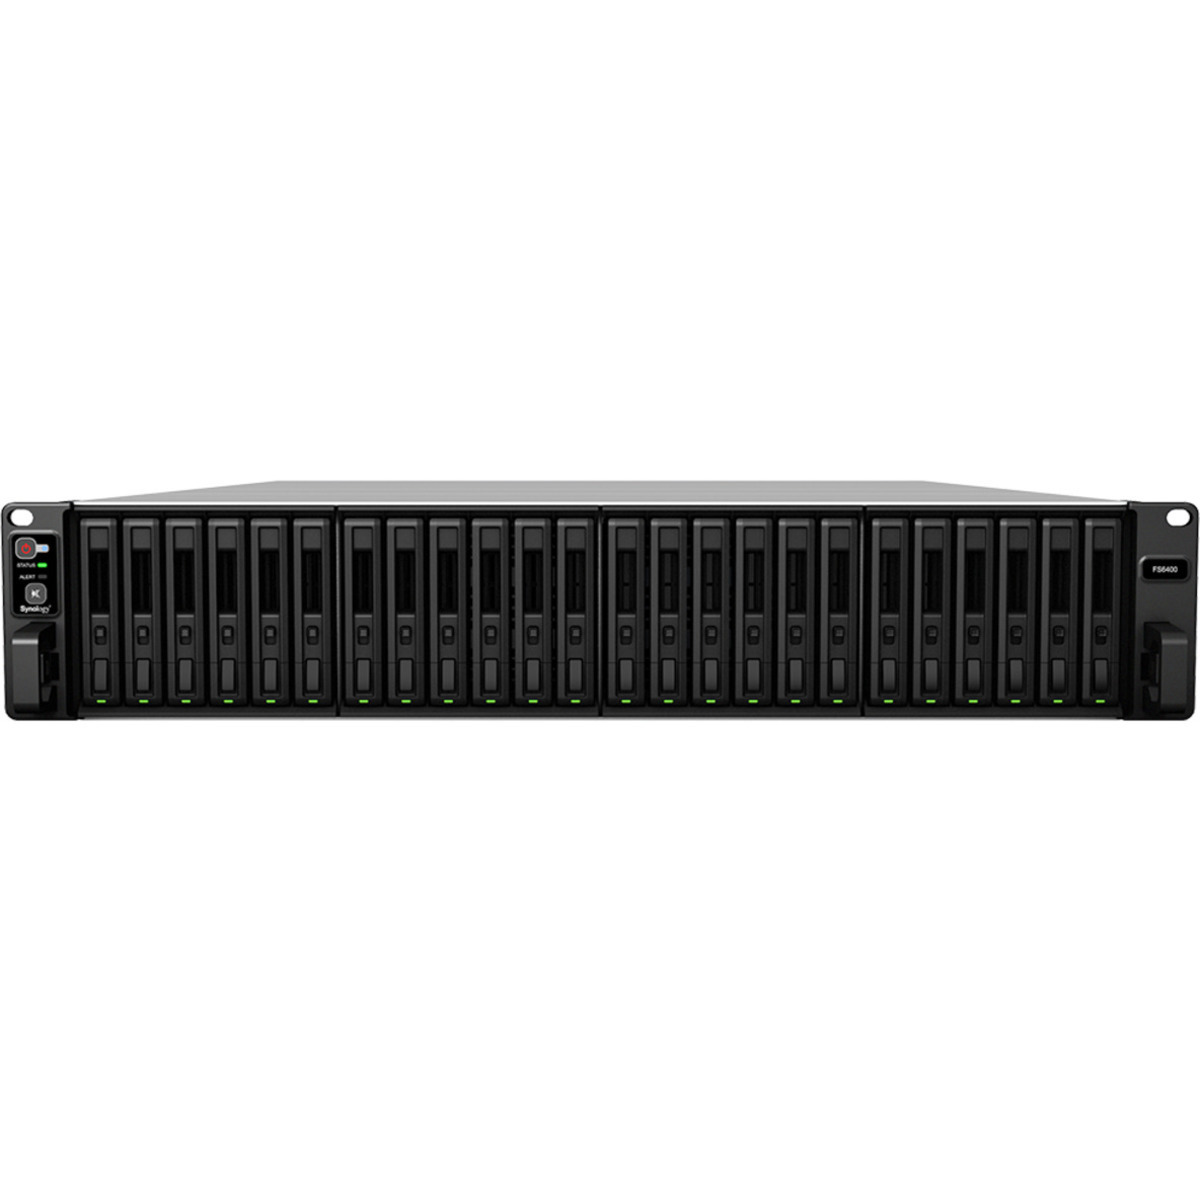 Synology FlashStation FS6400 38tb 24-Bay RackMount Large Business / Enterprise NAS - Network Attached Storage Device 19x2tb Western Digital Red SA500 WDS200T1R0A 2.5 560/530MB/s SATA 6Gb/s SSD NAS Class Drives Installed - Burn-In Tested FlashStation FS6400